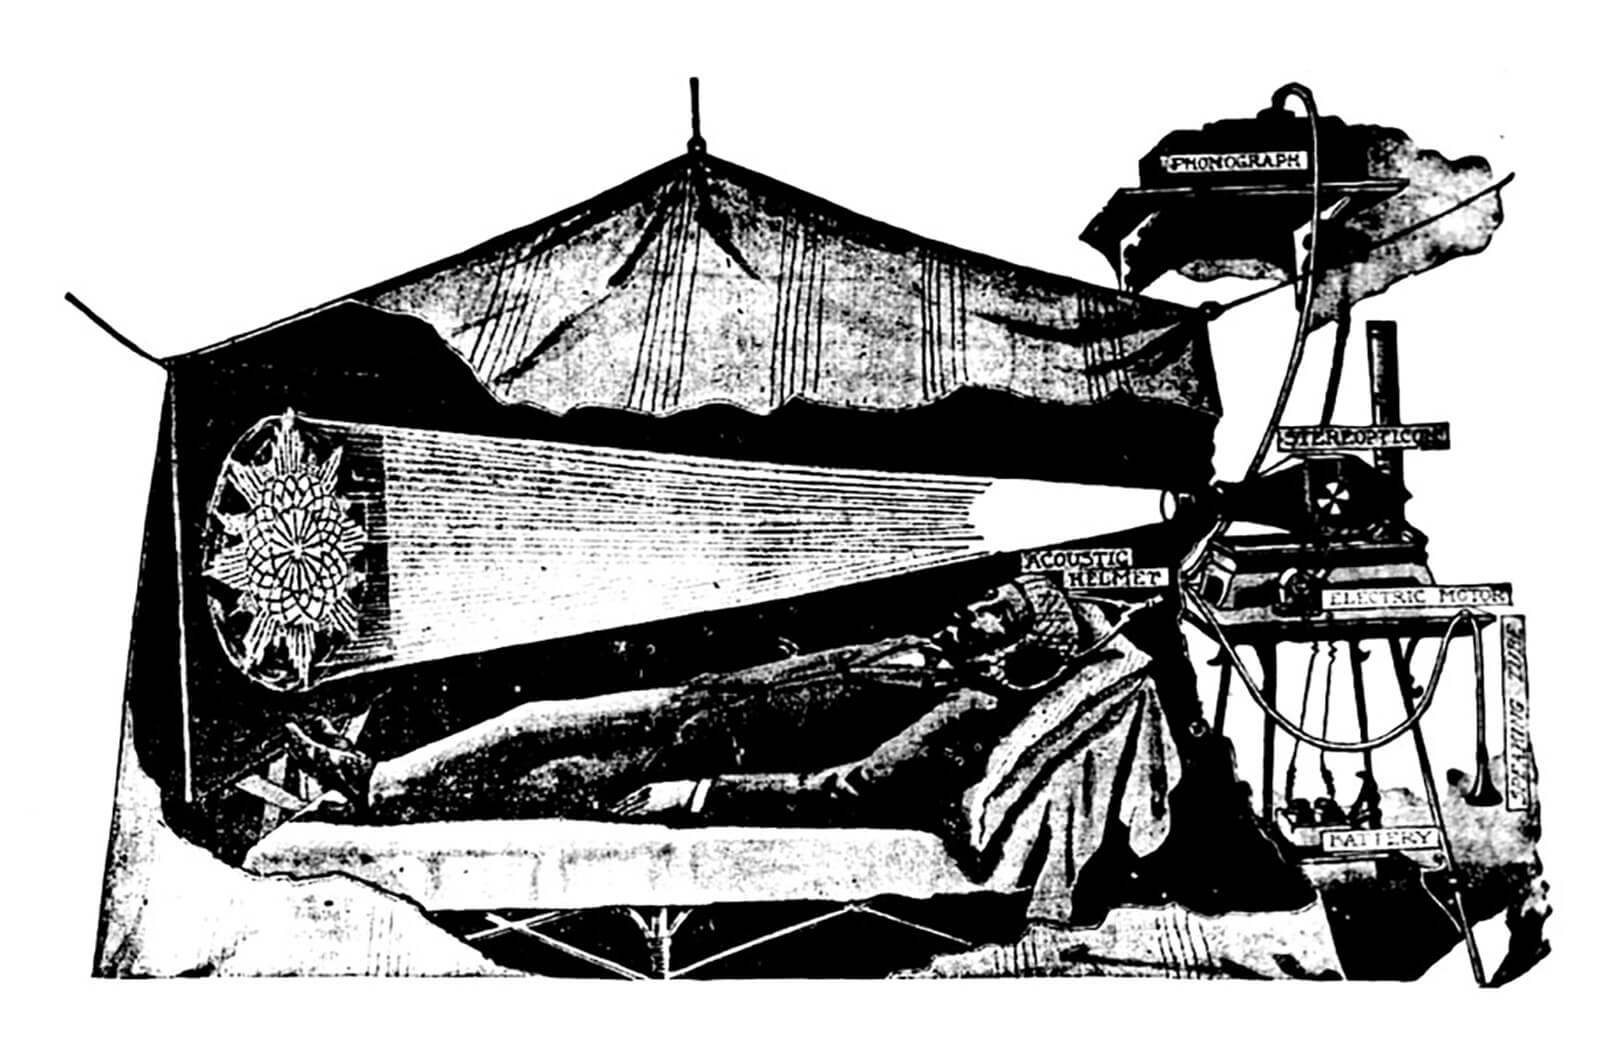 J. Leonard Corning’s tent for inducing pleasant dreams. Illustration from the St Louis Post-Dispatch, 4 June 1899.